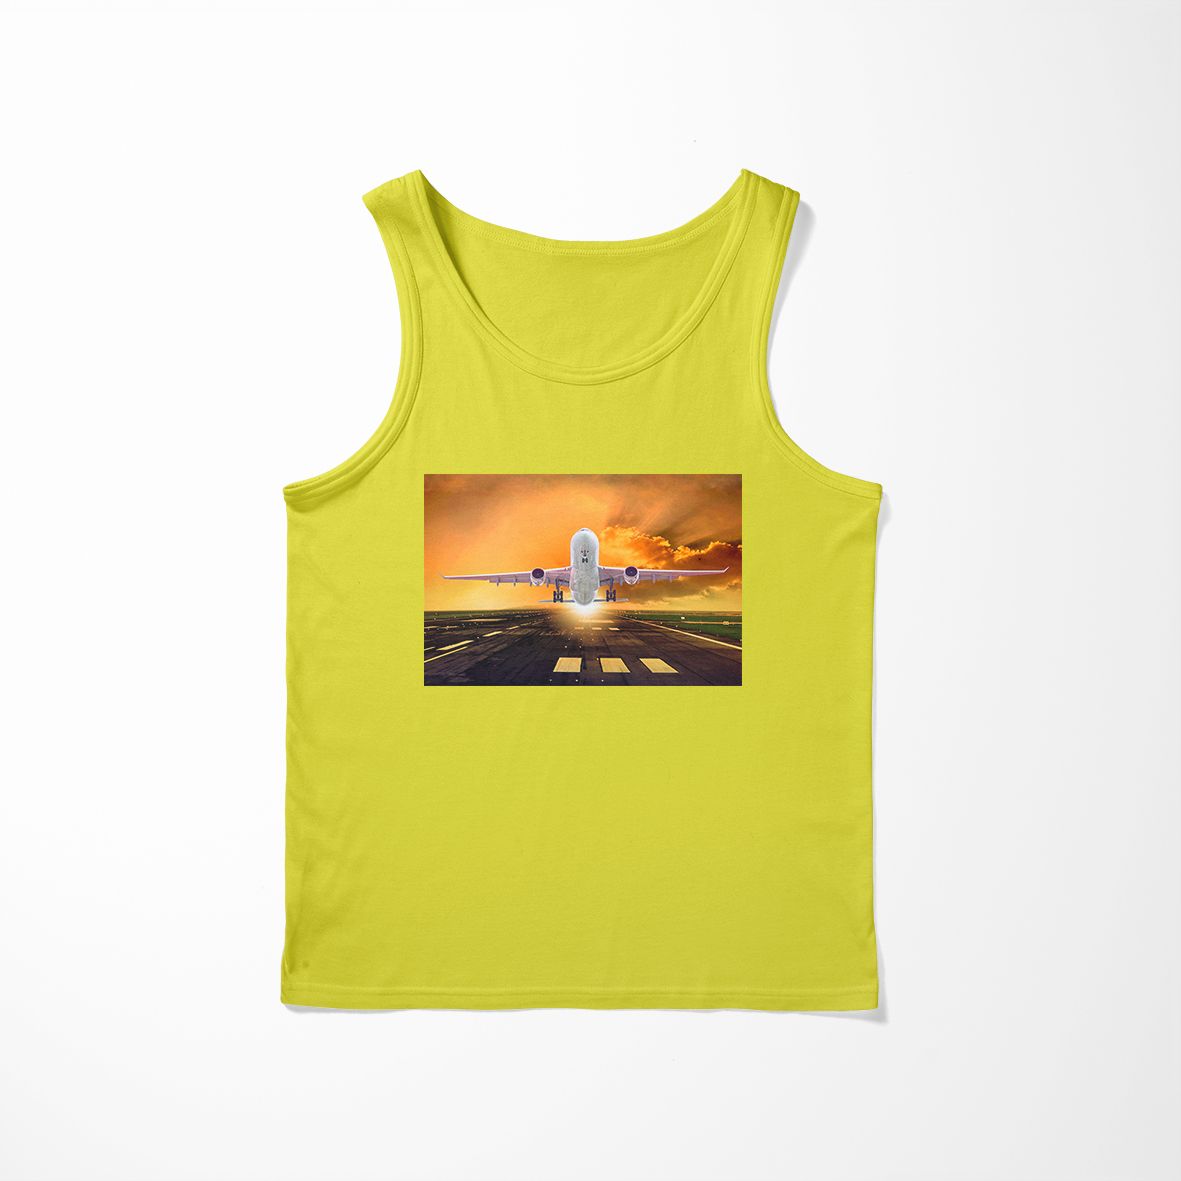 Amazing Departing Aircraft Sunset & Clouds Behind Designed Tank Tops